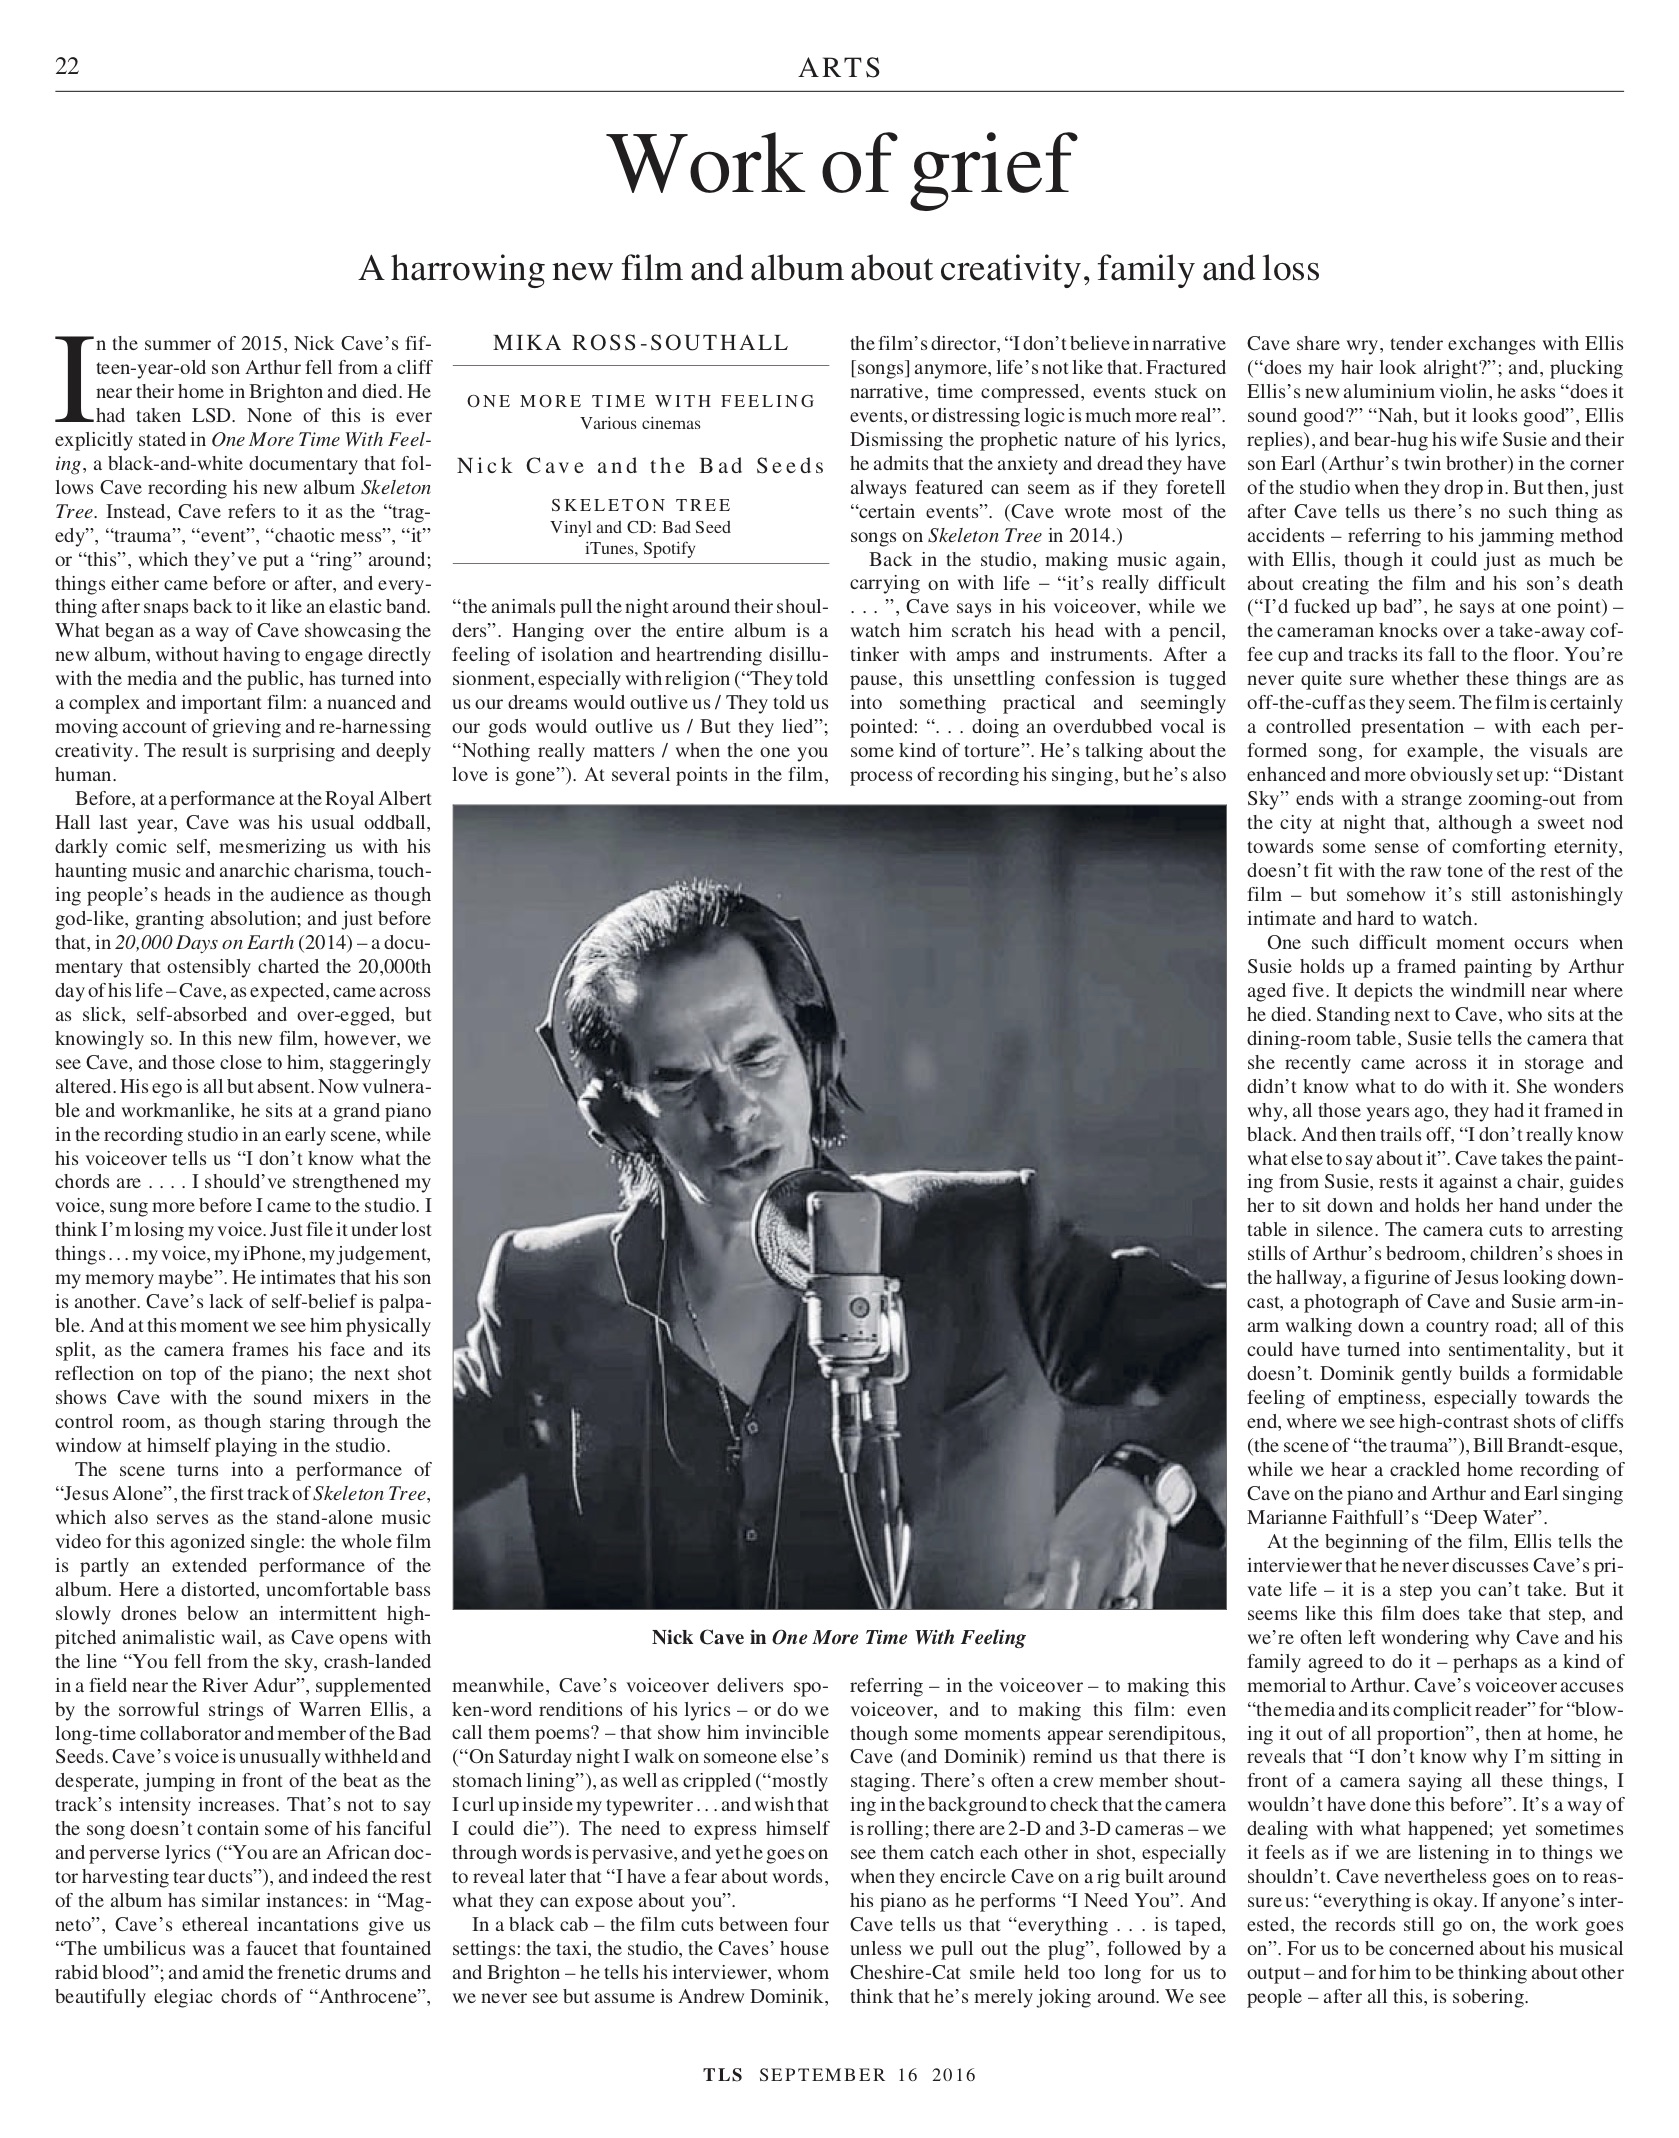 The Times Literary Supplement, 16 September 2016. "Work of grief, Nick Cave"